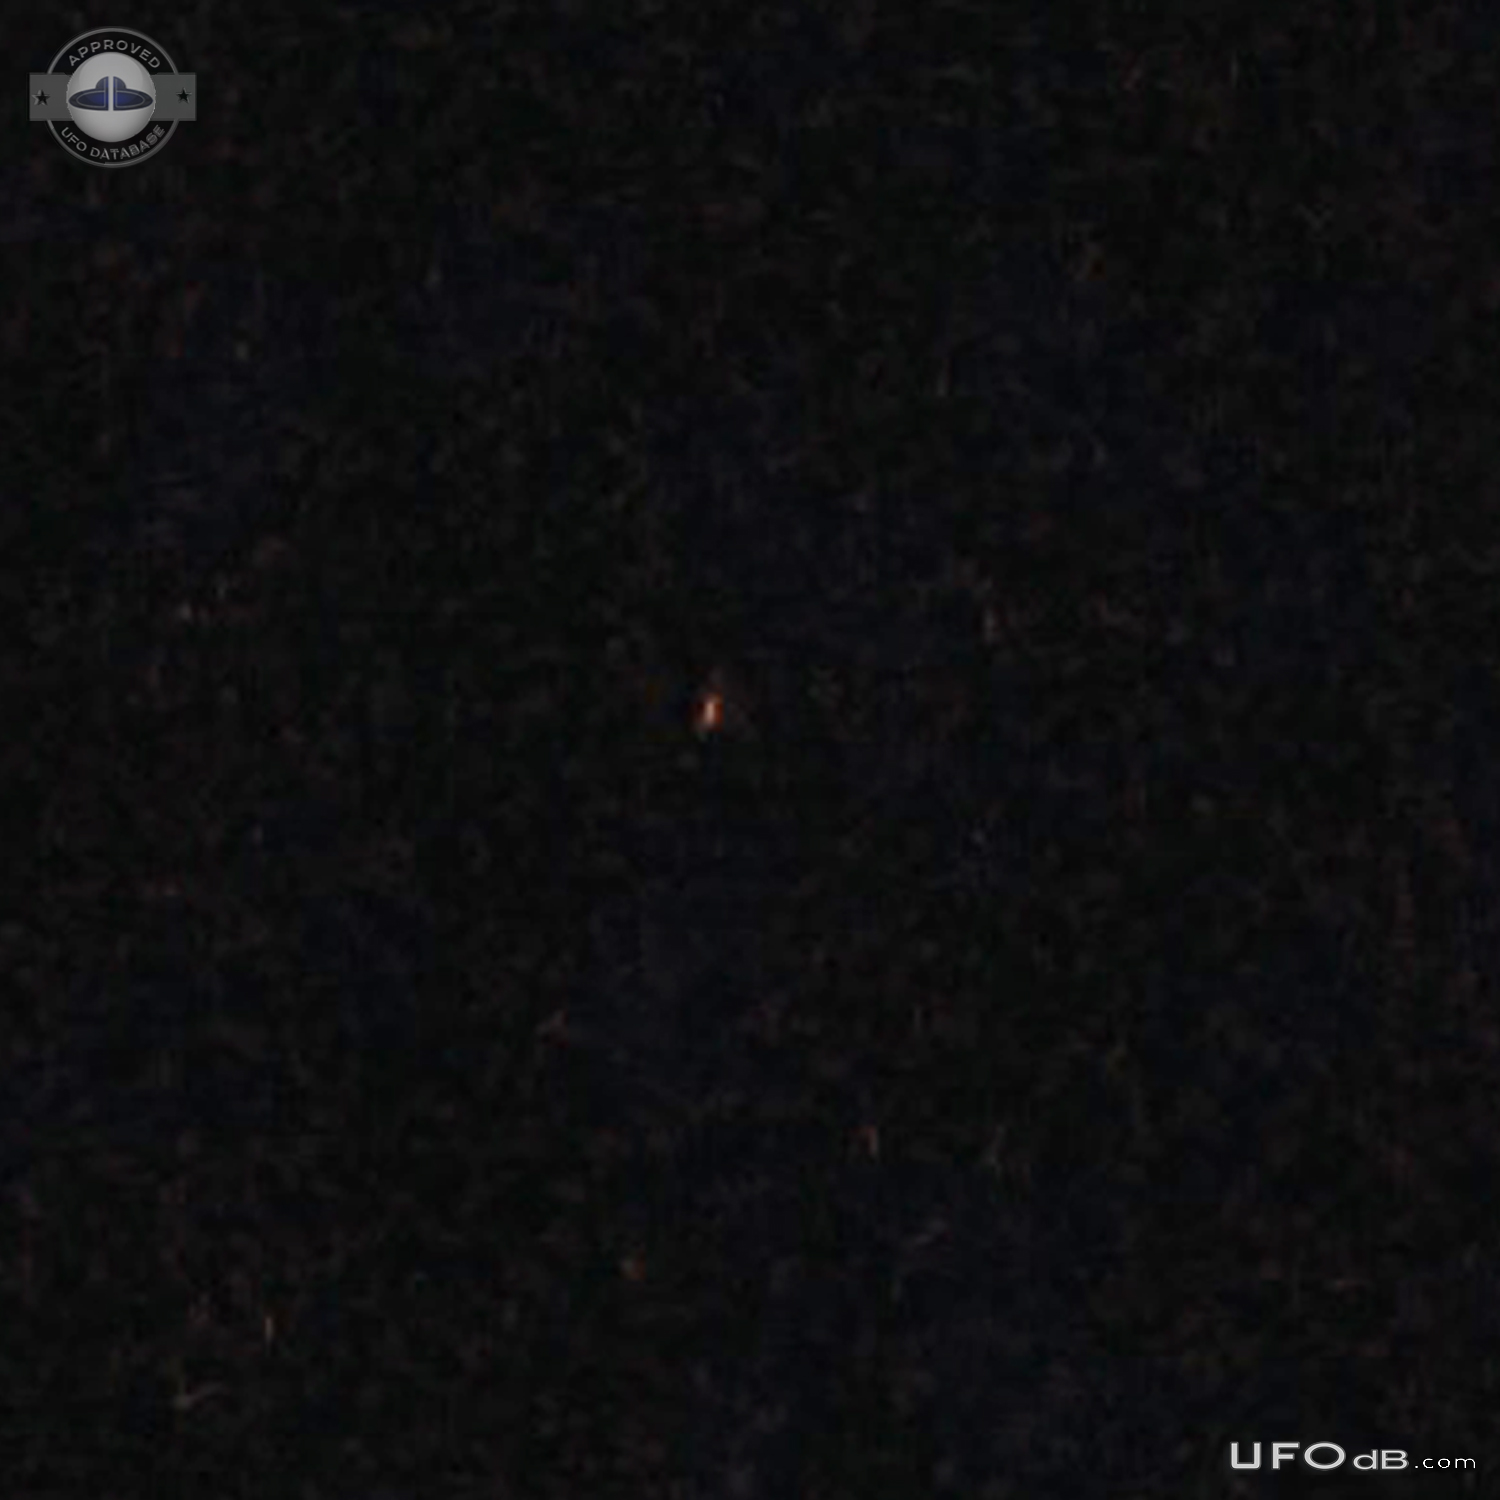 Saw a bright glowing orange UFO hover and move oddly in the night sky  UFO Picture #756-3